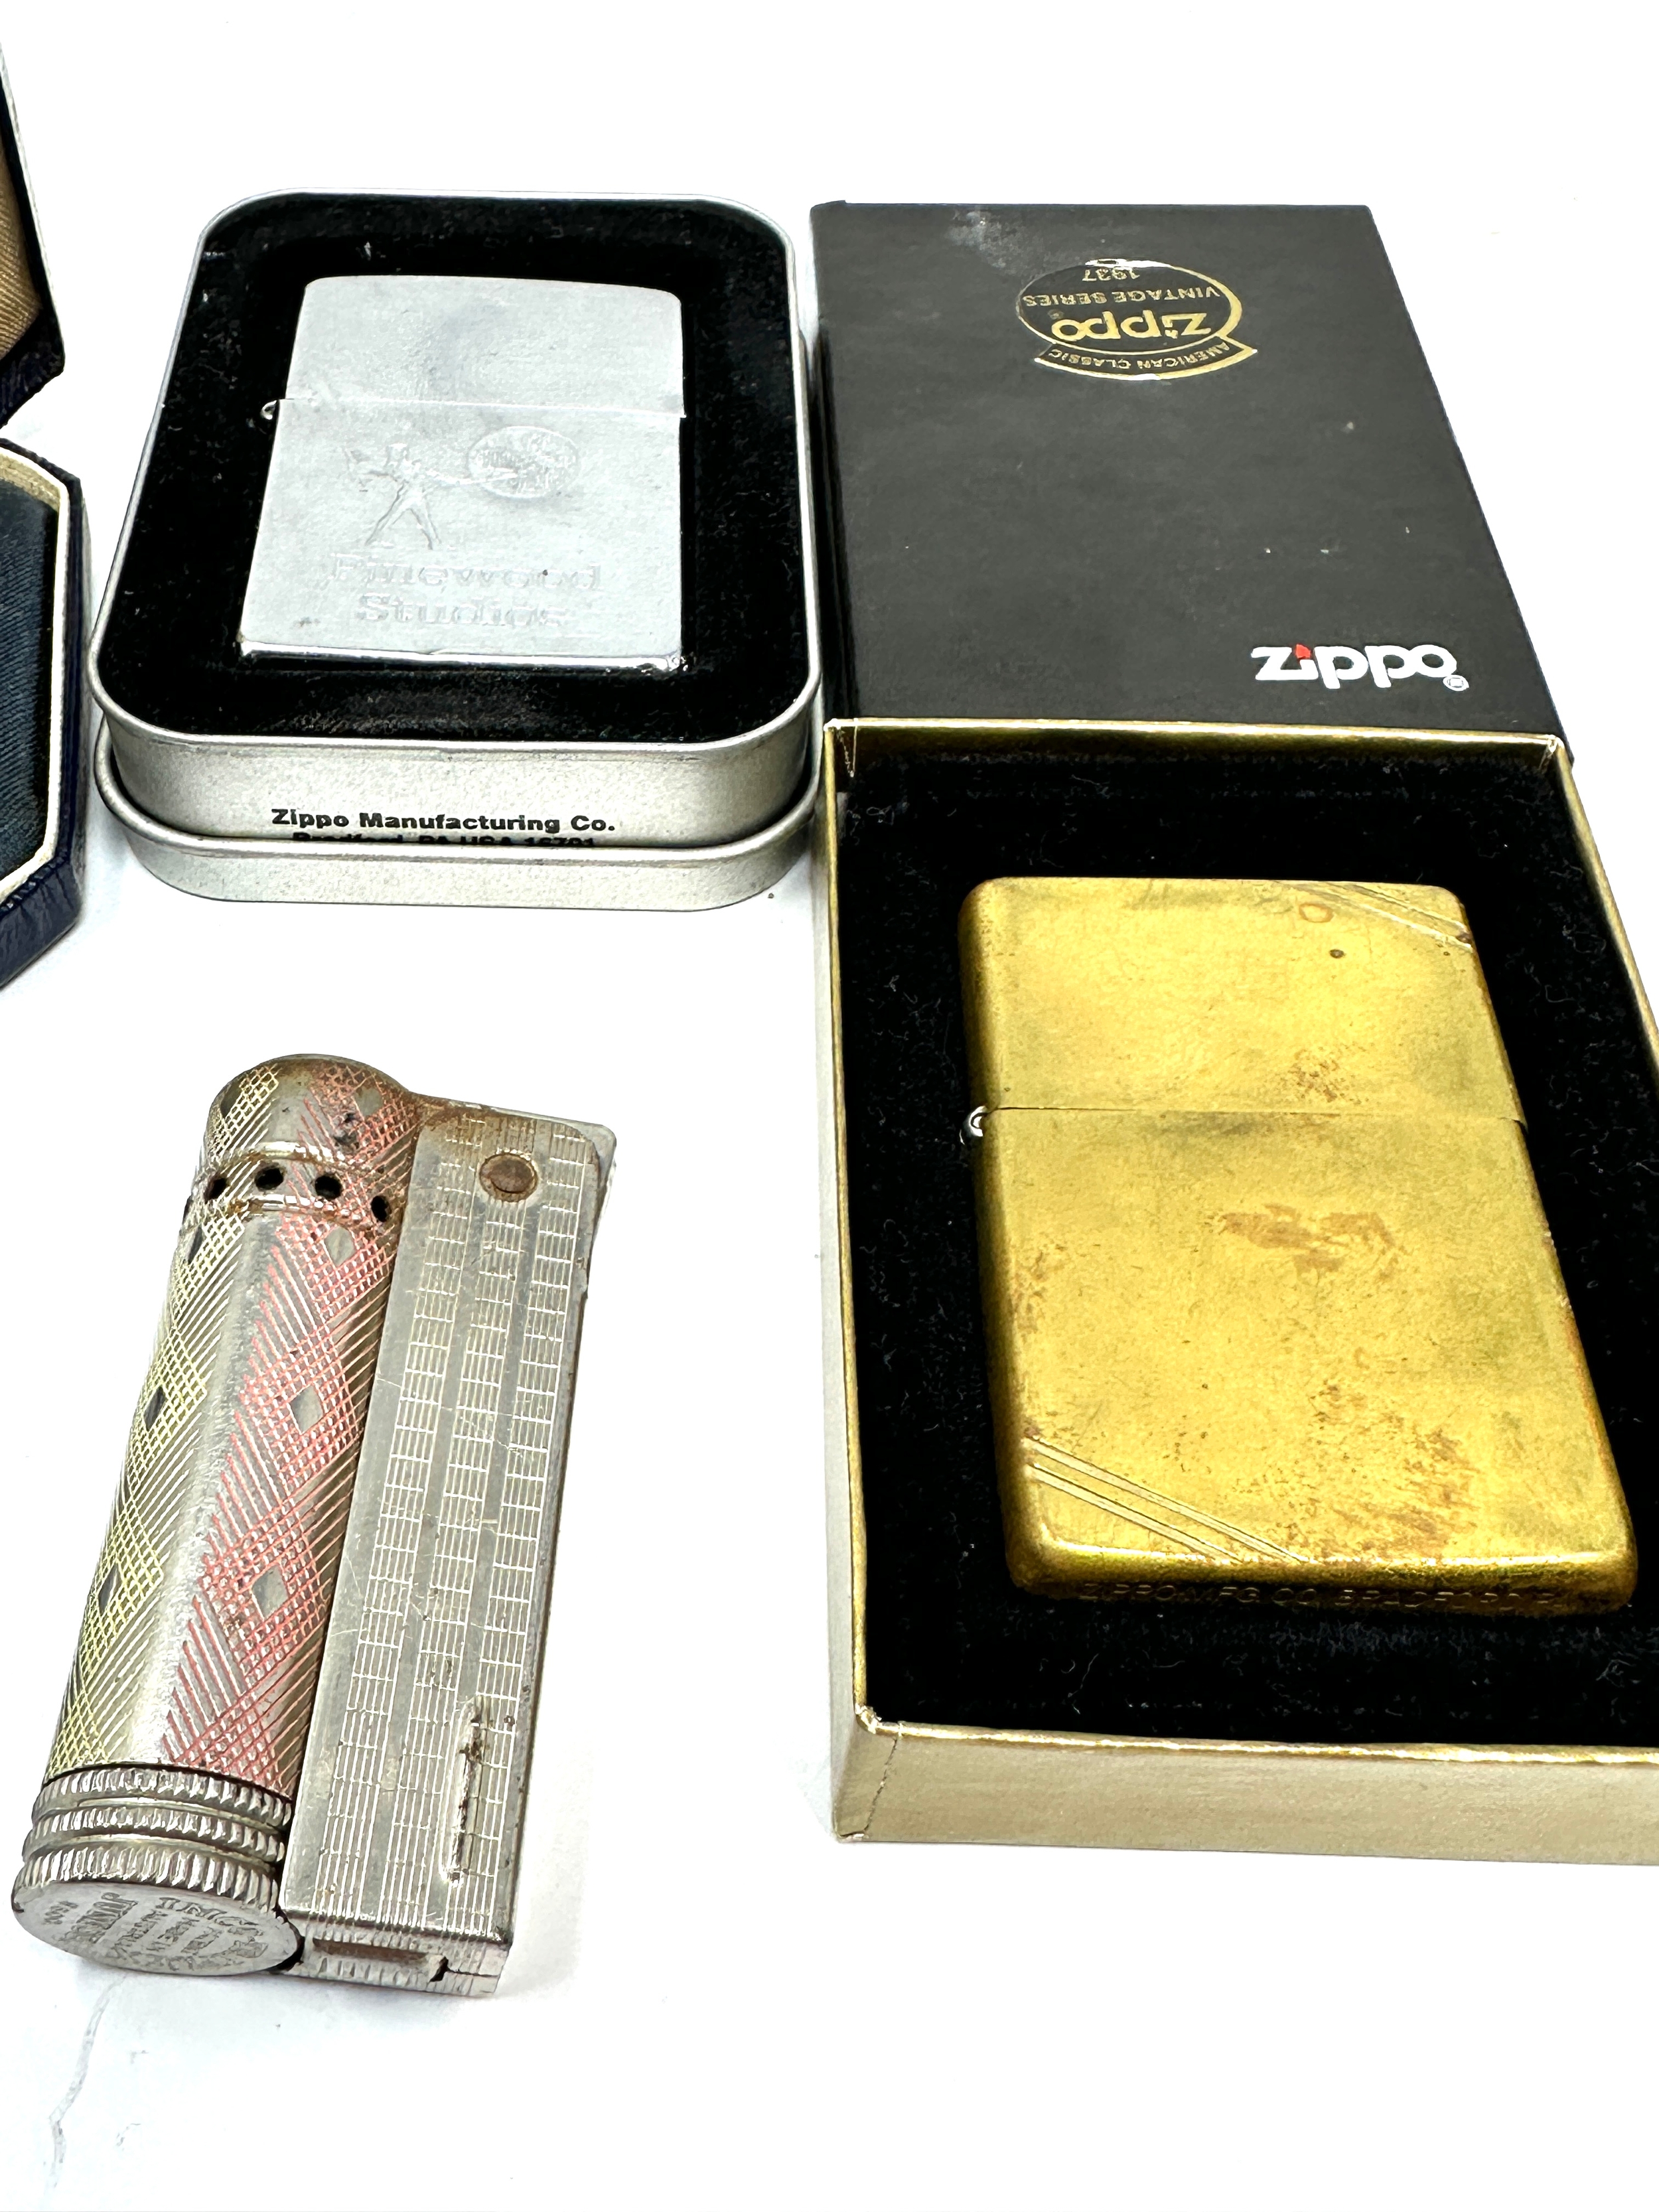 Collection of vintage cigarette lighters includes zippo etc - Image 4 of 4